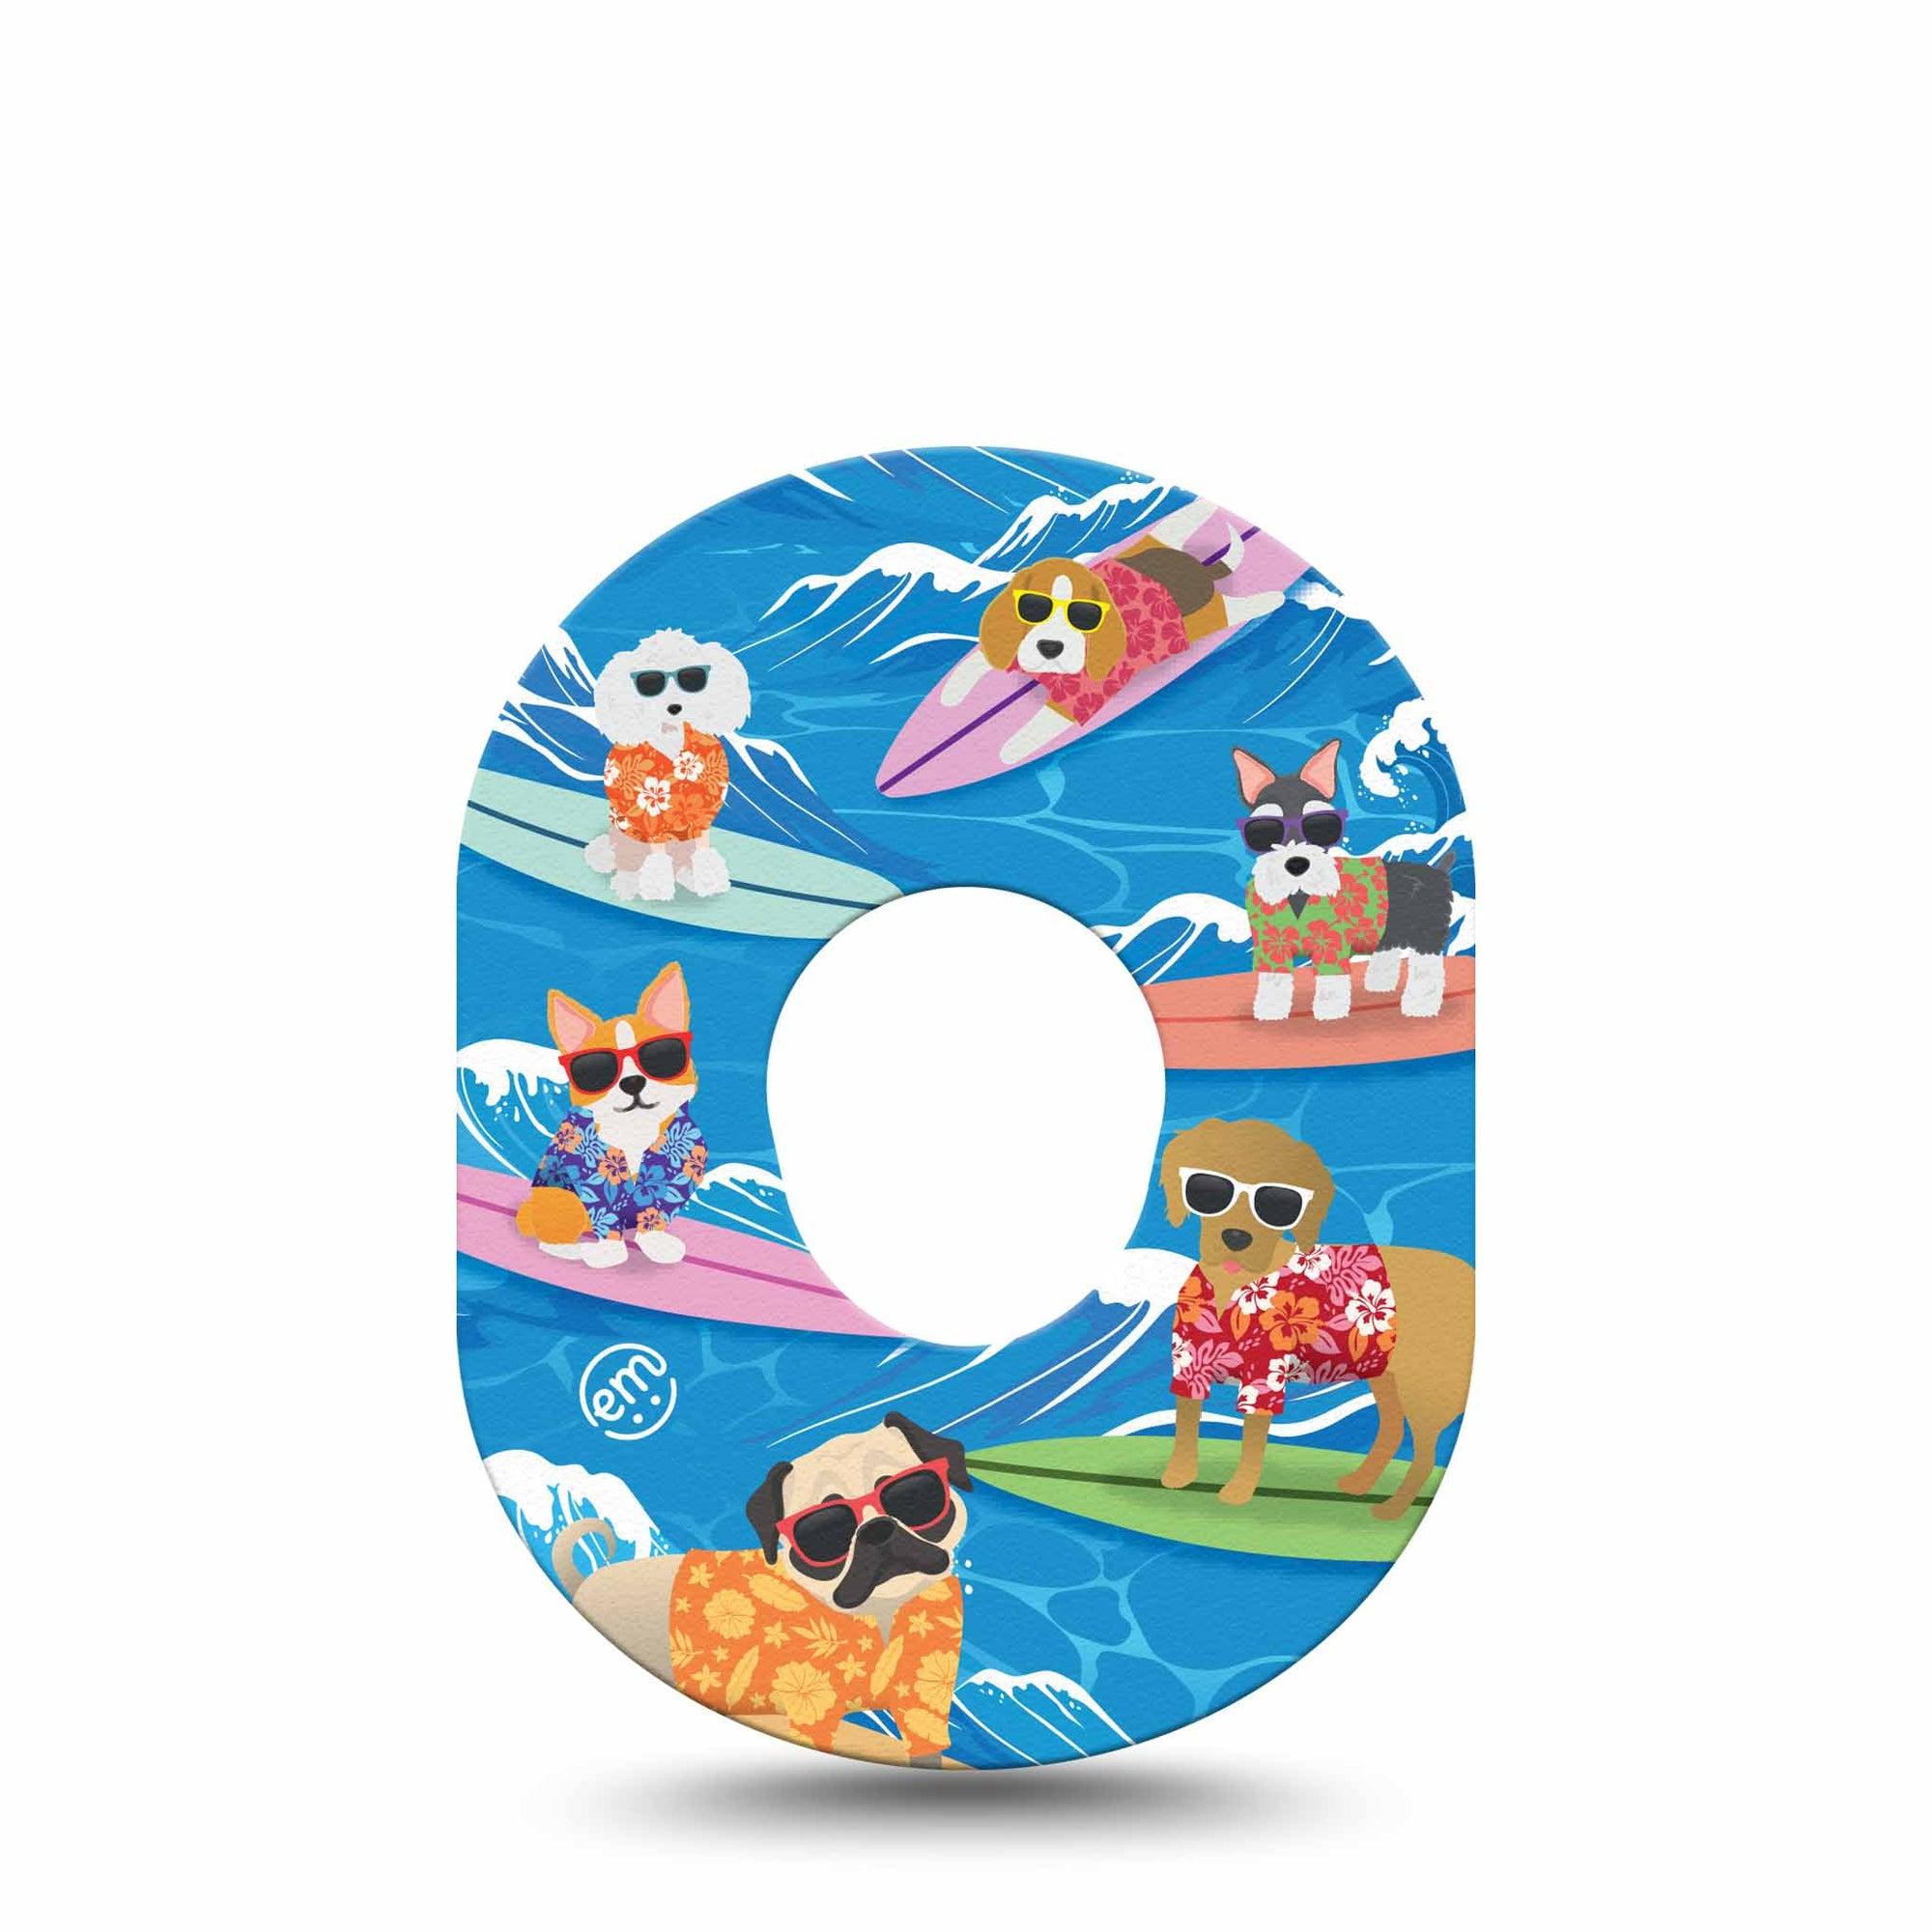 ExpressionMed Surfing Dogs Dexcom G7 Tape, Single, Cool Dogs Inspired, CGM Plaster Patch Design